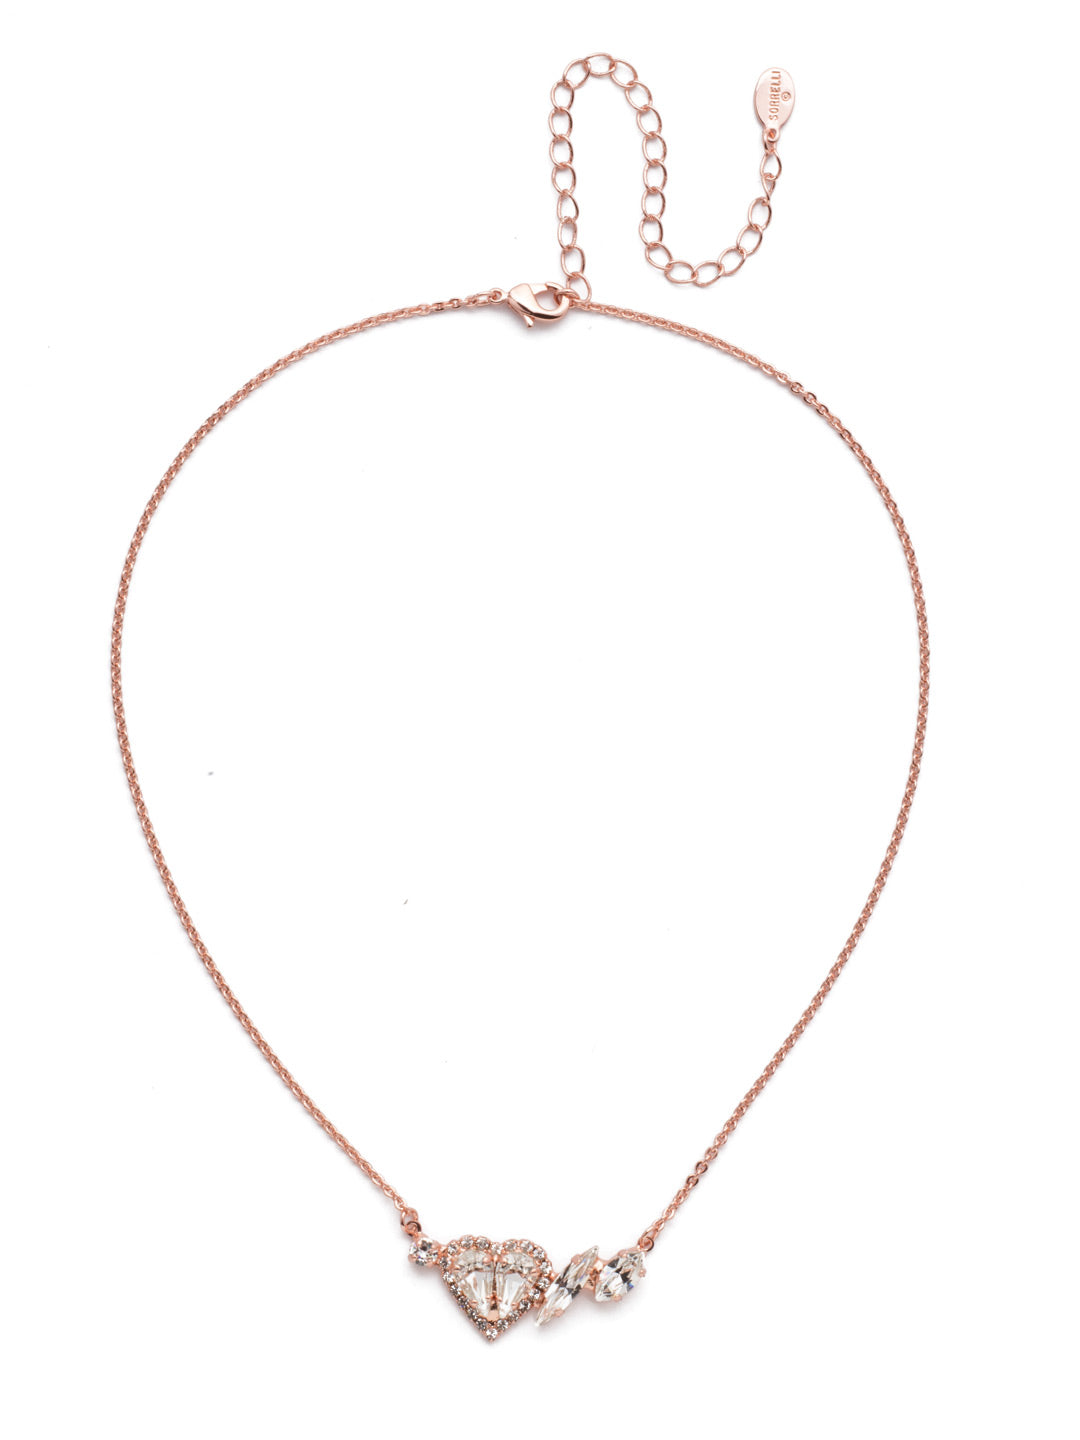 Vida Pendant Necklace - NER12RGCRY - <p>Give the traditional heart pendant a bit of oomph when you wear the Vida Pendant Necklace. The sparkling crystal heart is offset by stunning stones in an assortment of fun shapes. From Sorrelli's Crystal collection in our Rose Gold-tone finish.</p>